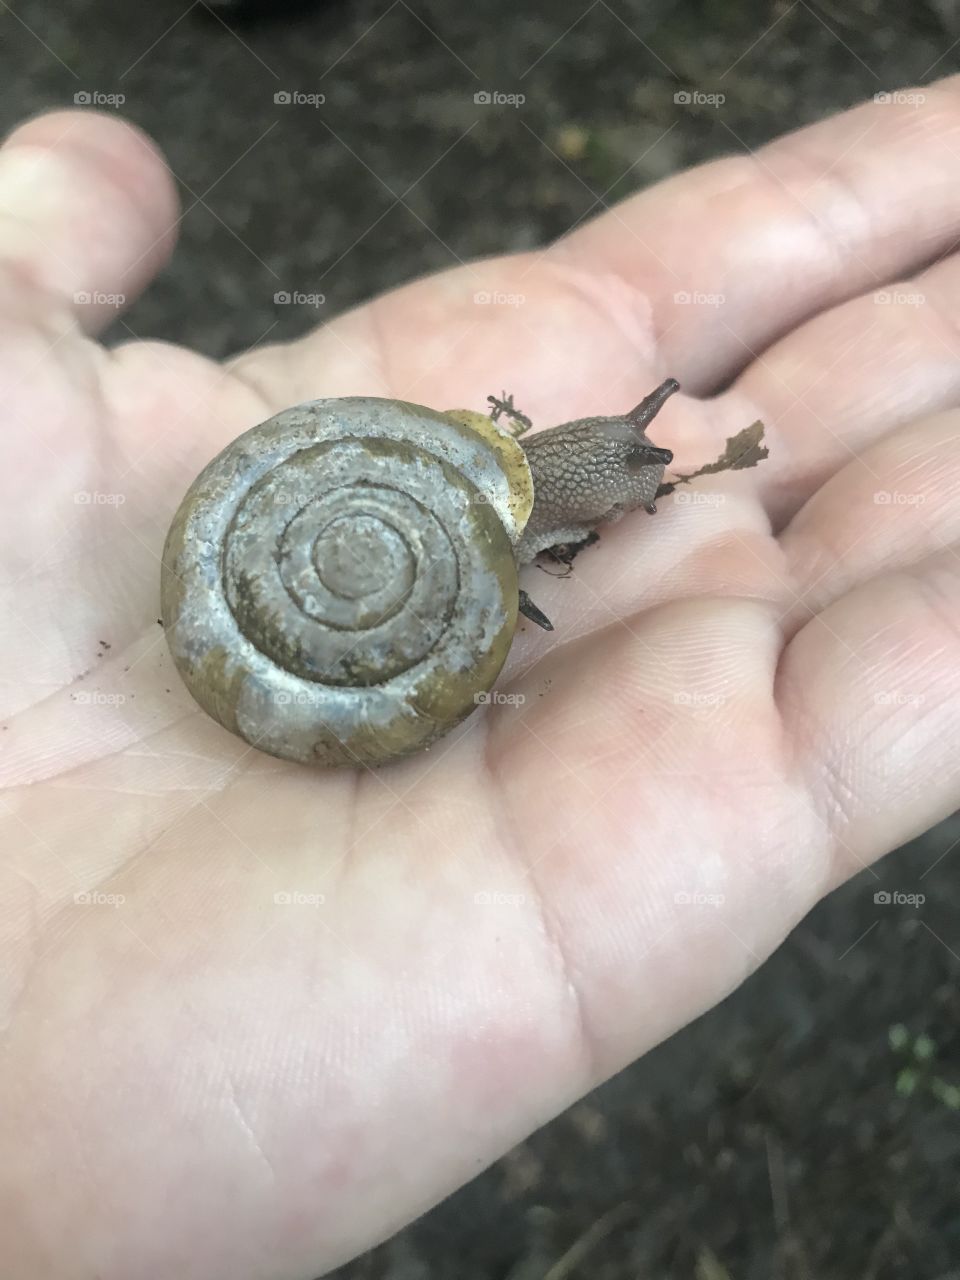 While hiking through a trail in the forest, I stumbled upon this handsome little snail crossing my path. 